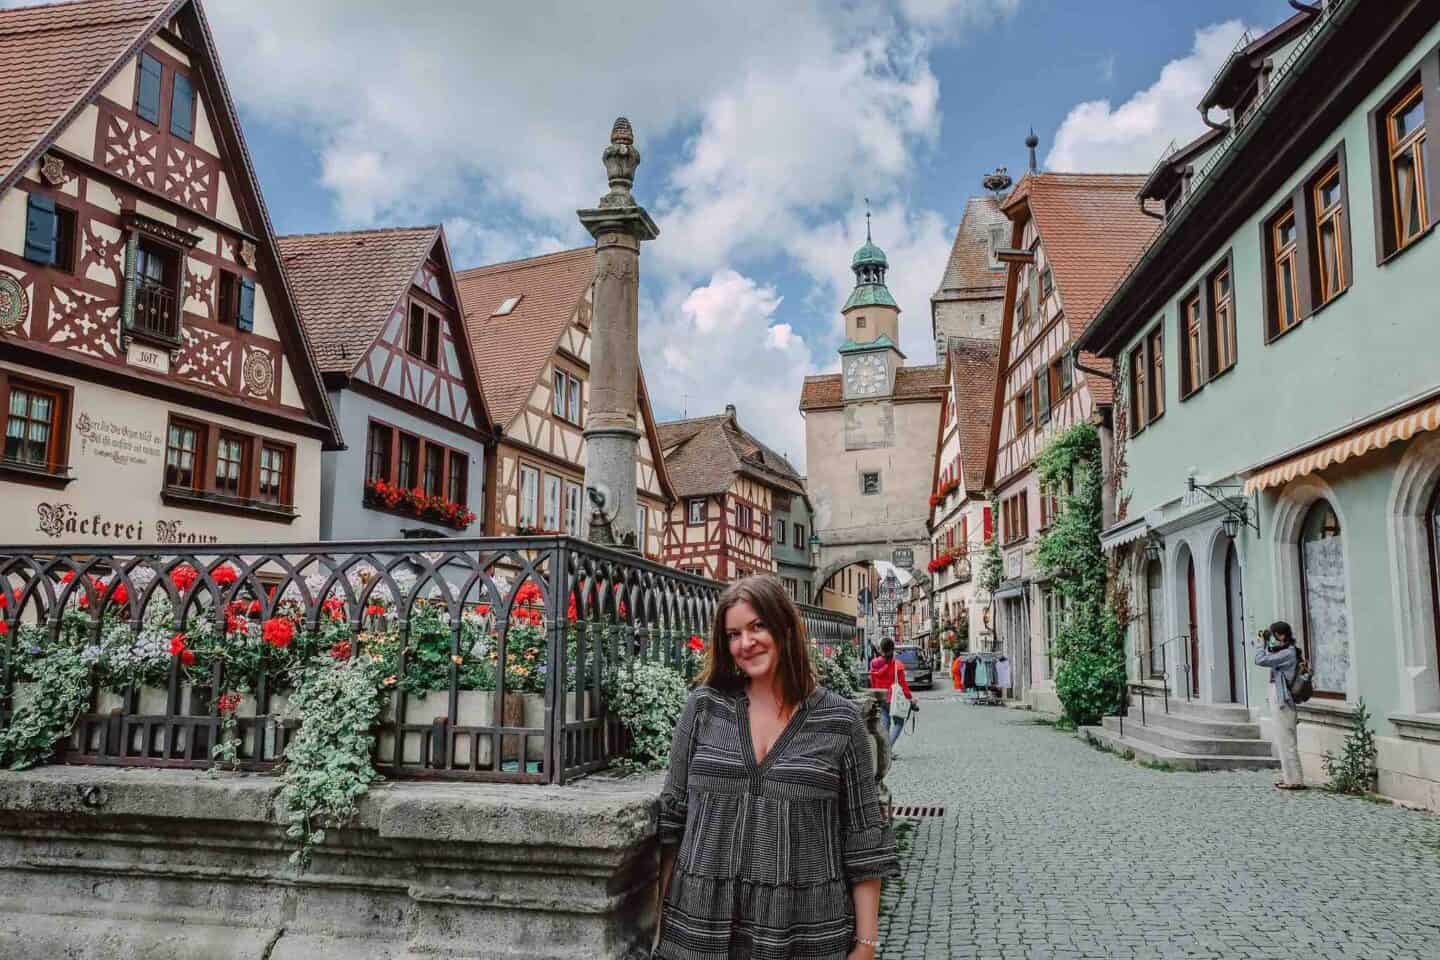 A woman stands smiling on a cobblestone street in Rothenburg ob der Tauber, with half-timbered buildings adorned with red flowers in the background. A historical clock tower rises in the distance, adding to the old-world charm of the scene.